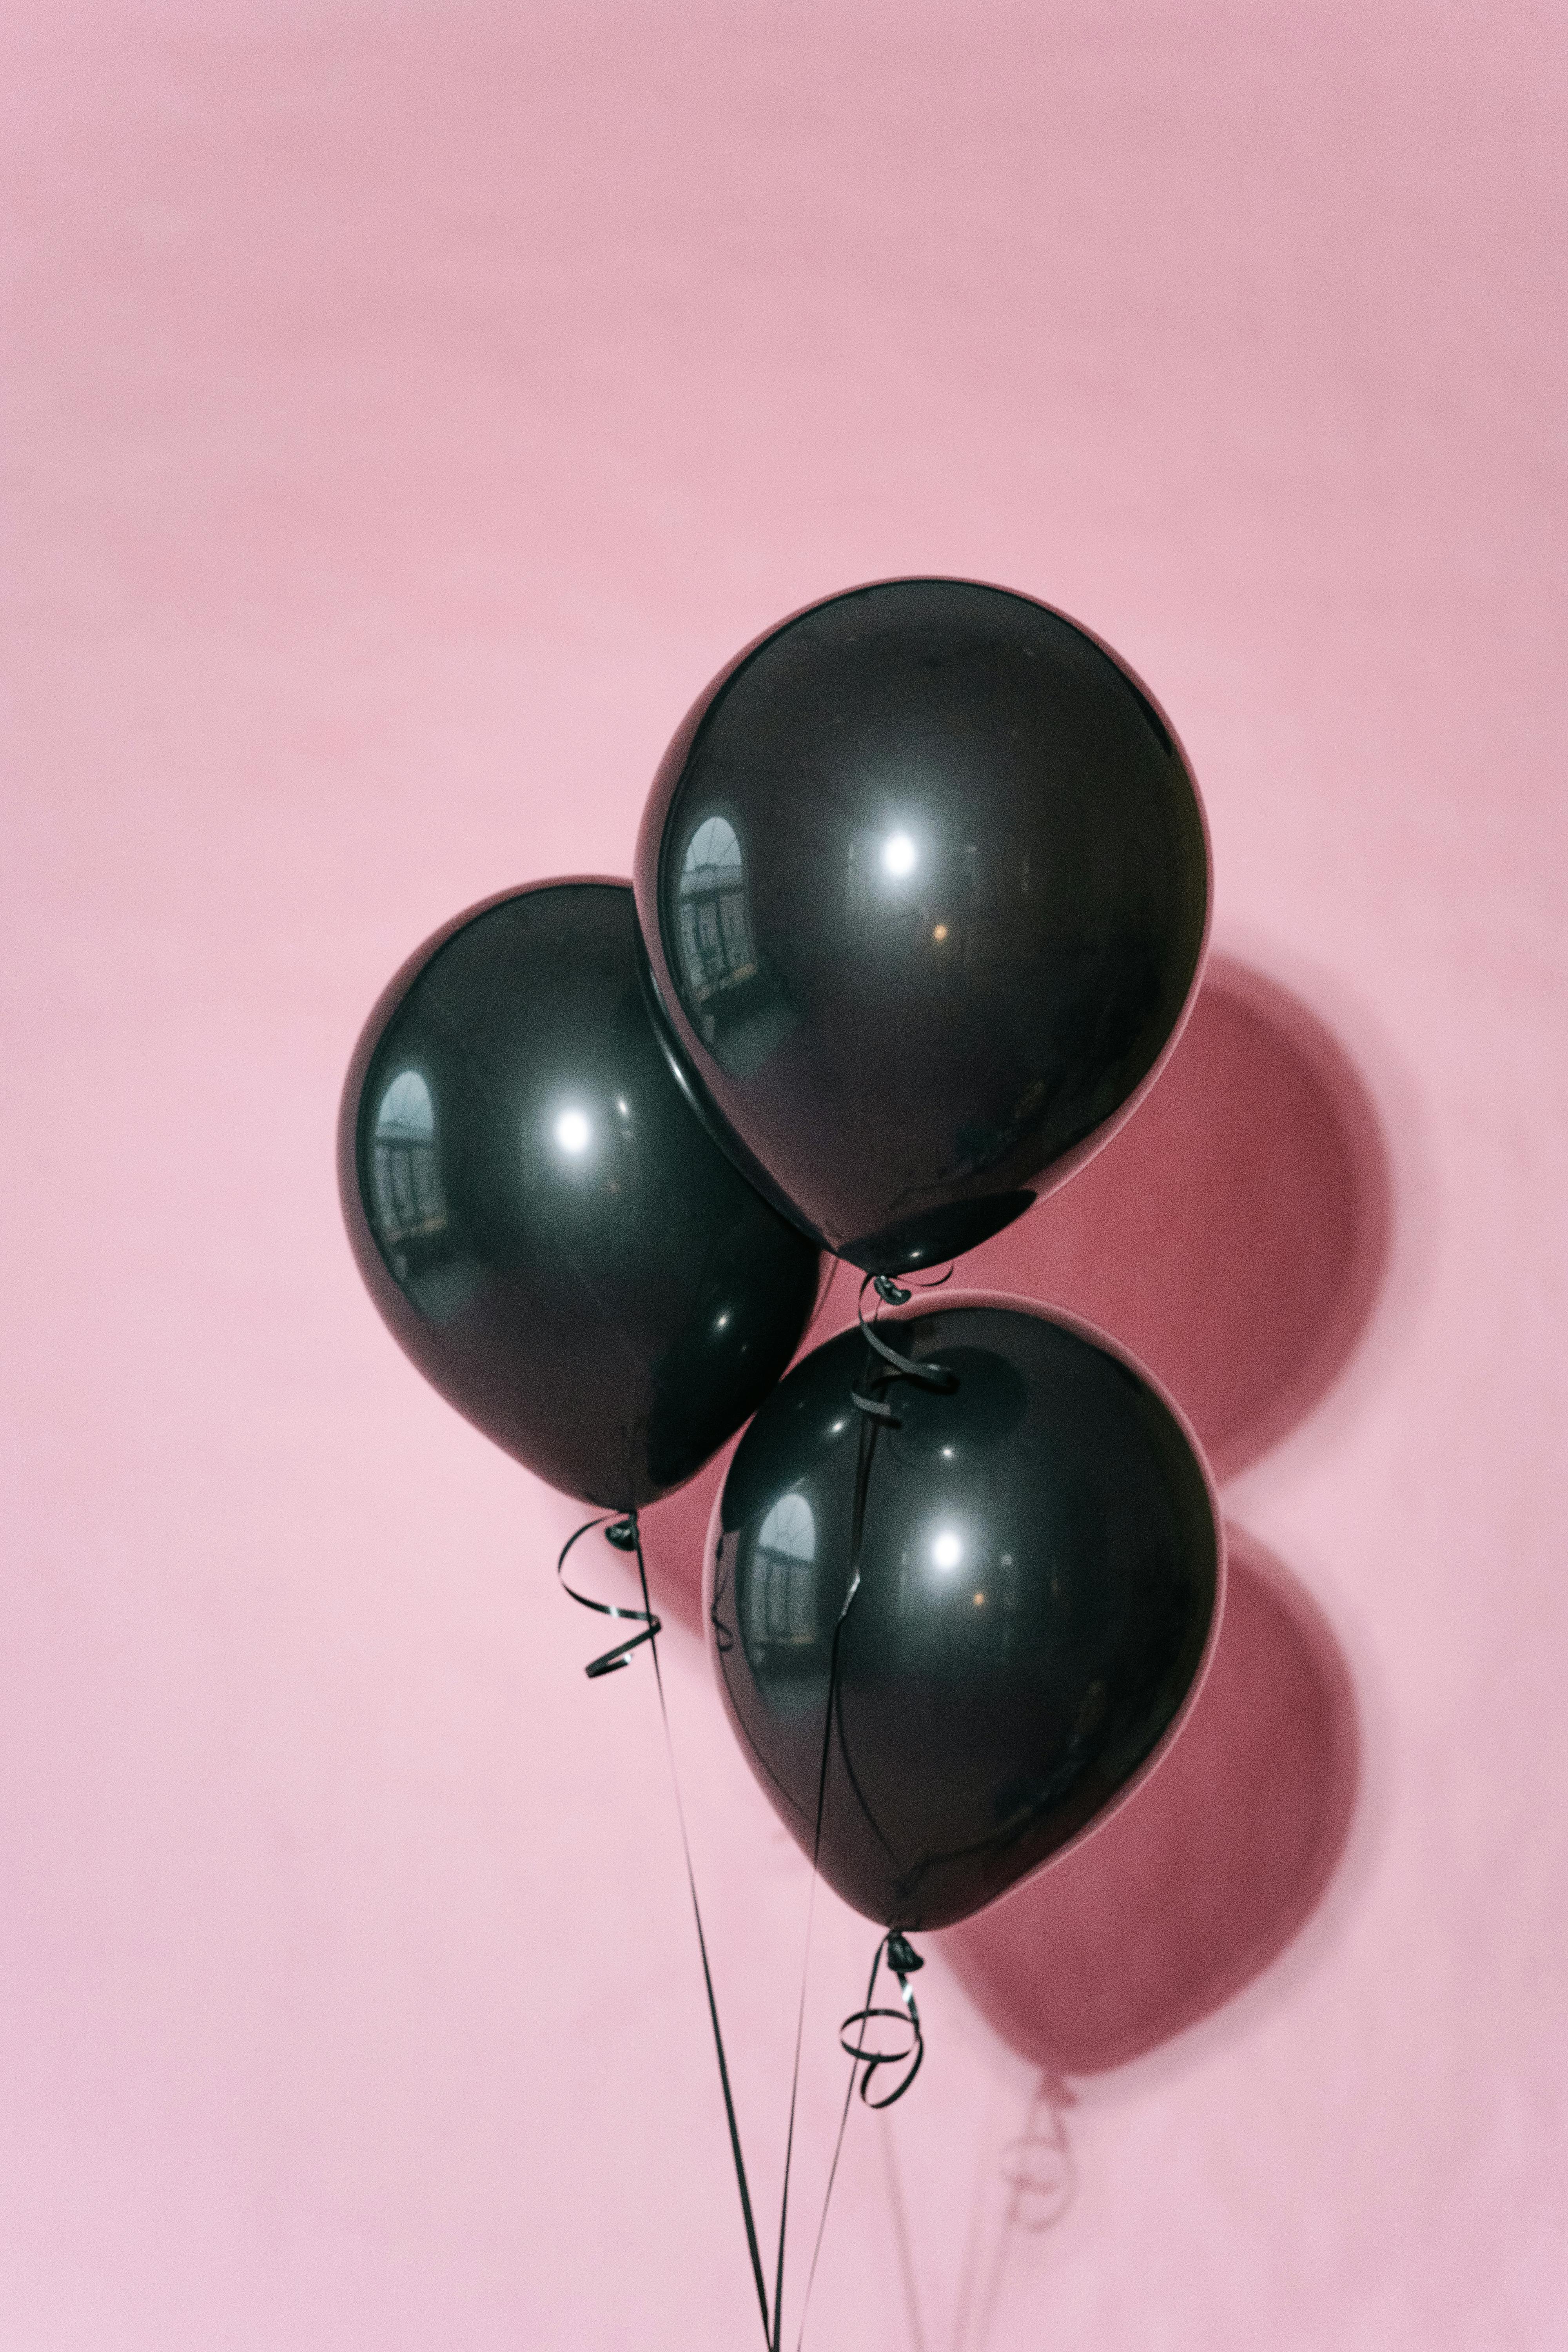 Black Balloons on Pink Background · Free Stock Photo